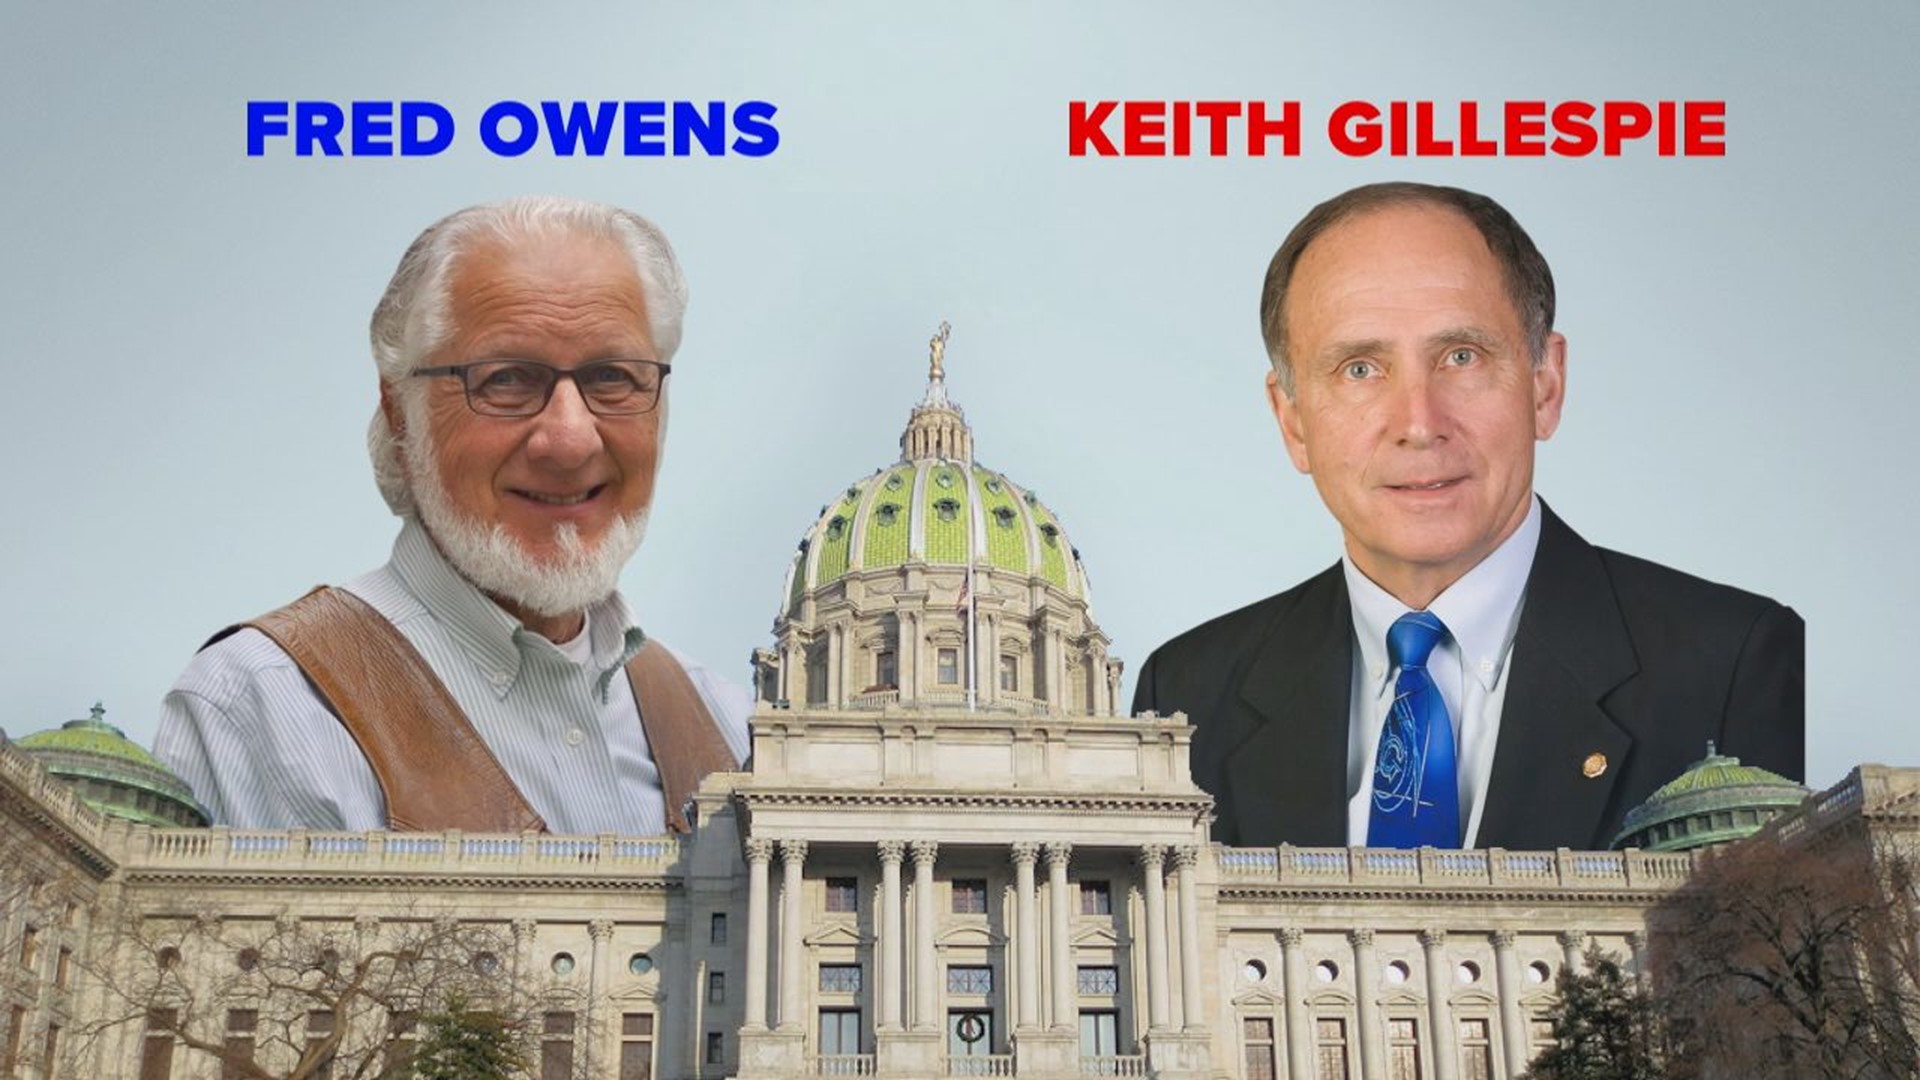 Gillespie is seeking a tenth term in the State House, in a district which covers northeastern York County along the I-83 and US-30 corridor.